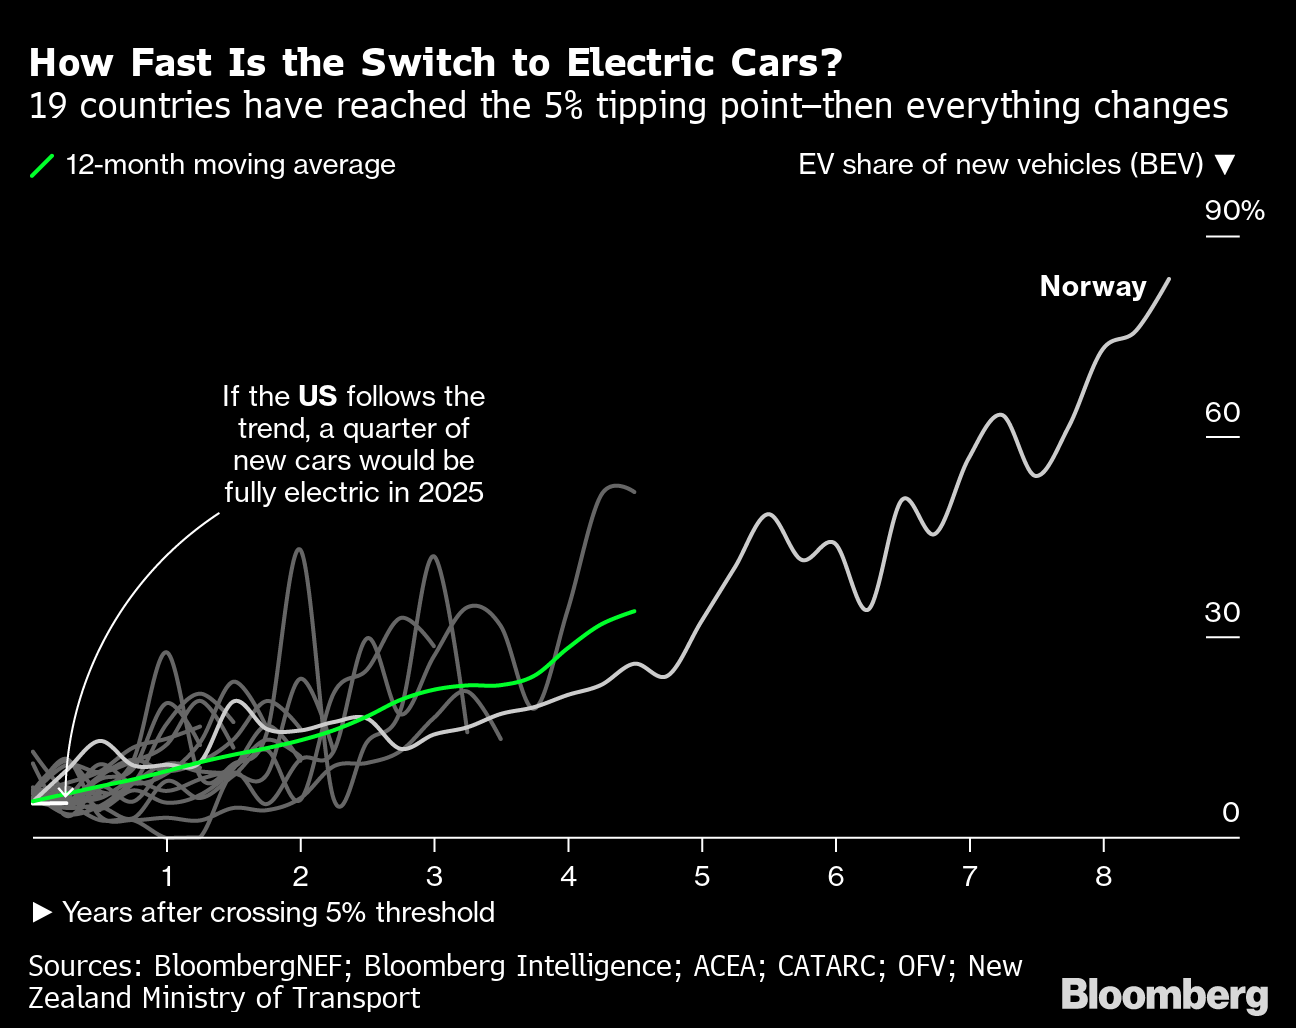 Batteries For Electric Cars Speed Toward a Tipping Point - Bloomberg